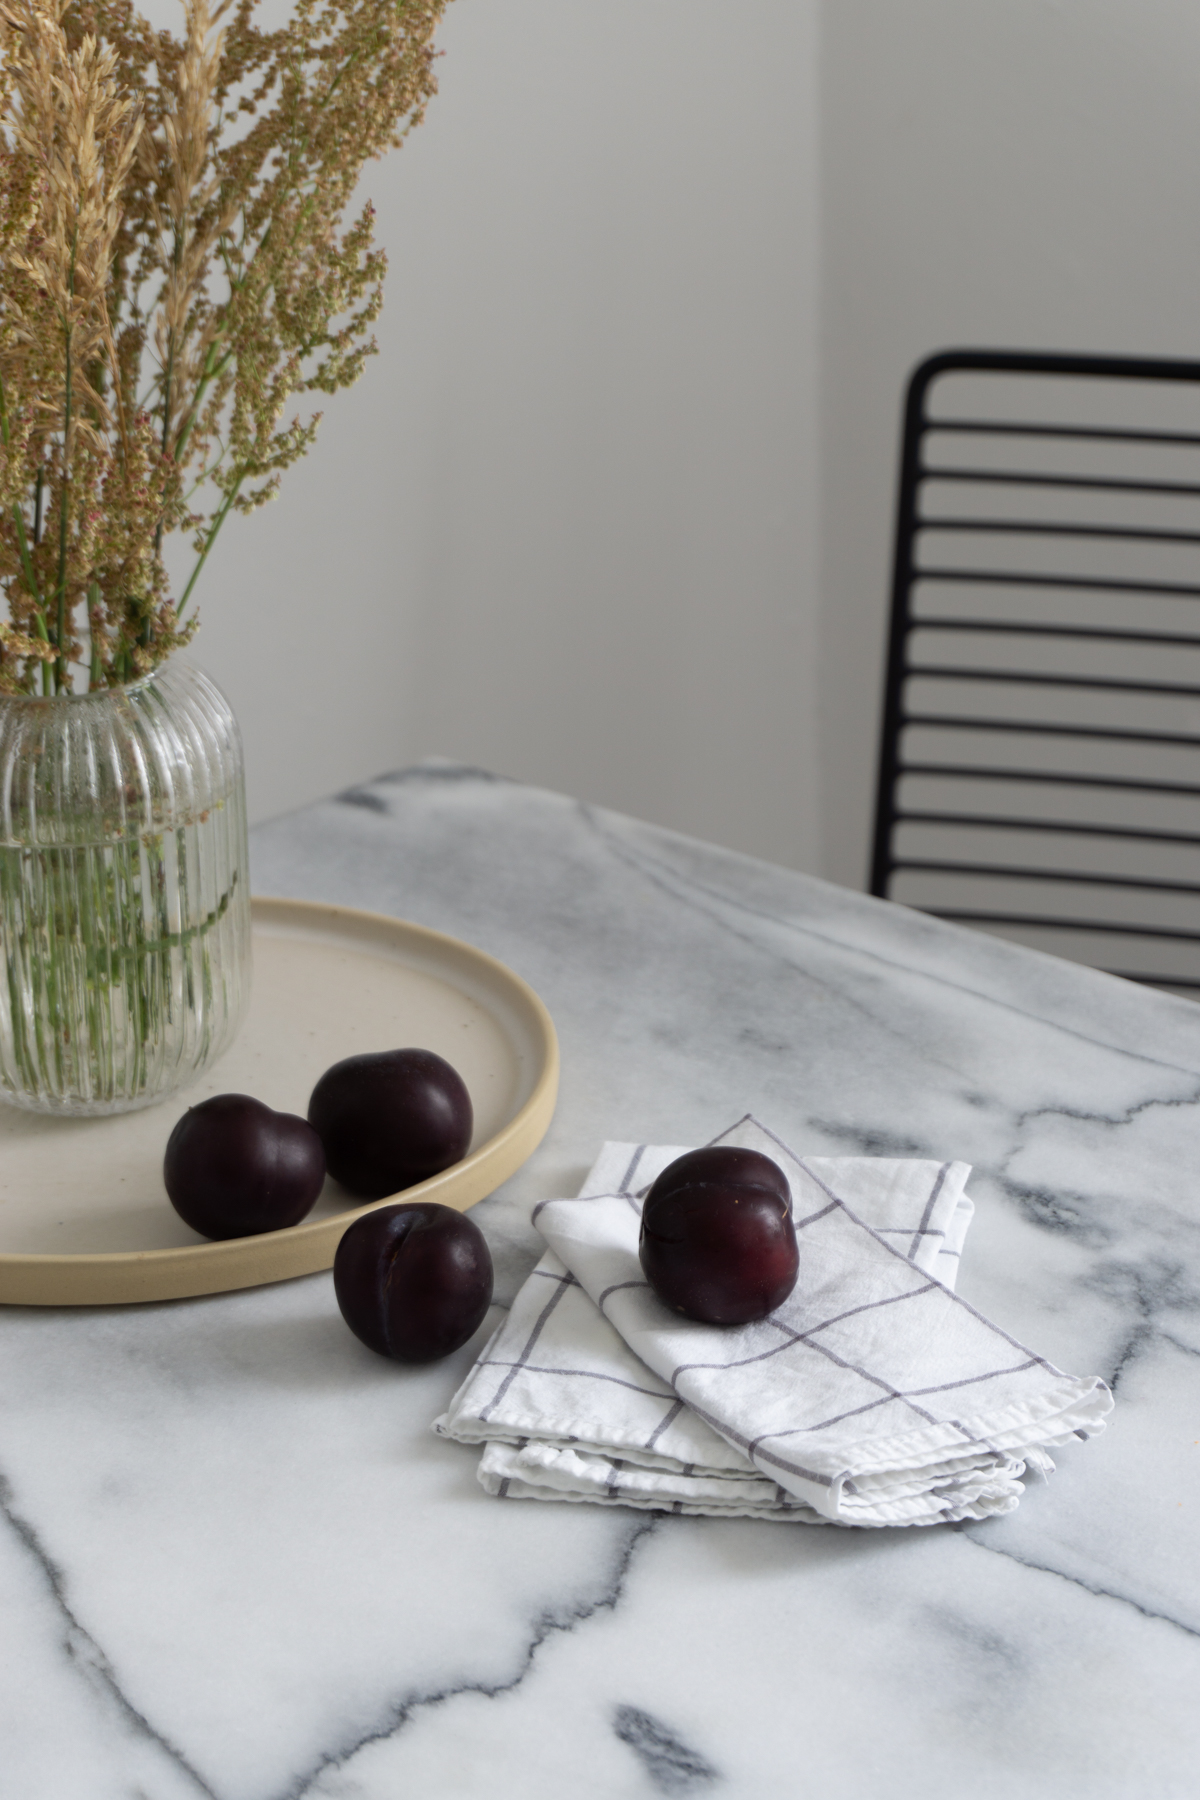 White and Beige Danish Inspired Kitchen | Plums, Marble Kitchen Table, Hay Hee Chair, Wheat Arrangement - RG Daily Blog, Interior Design